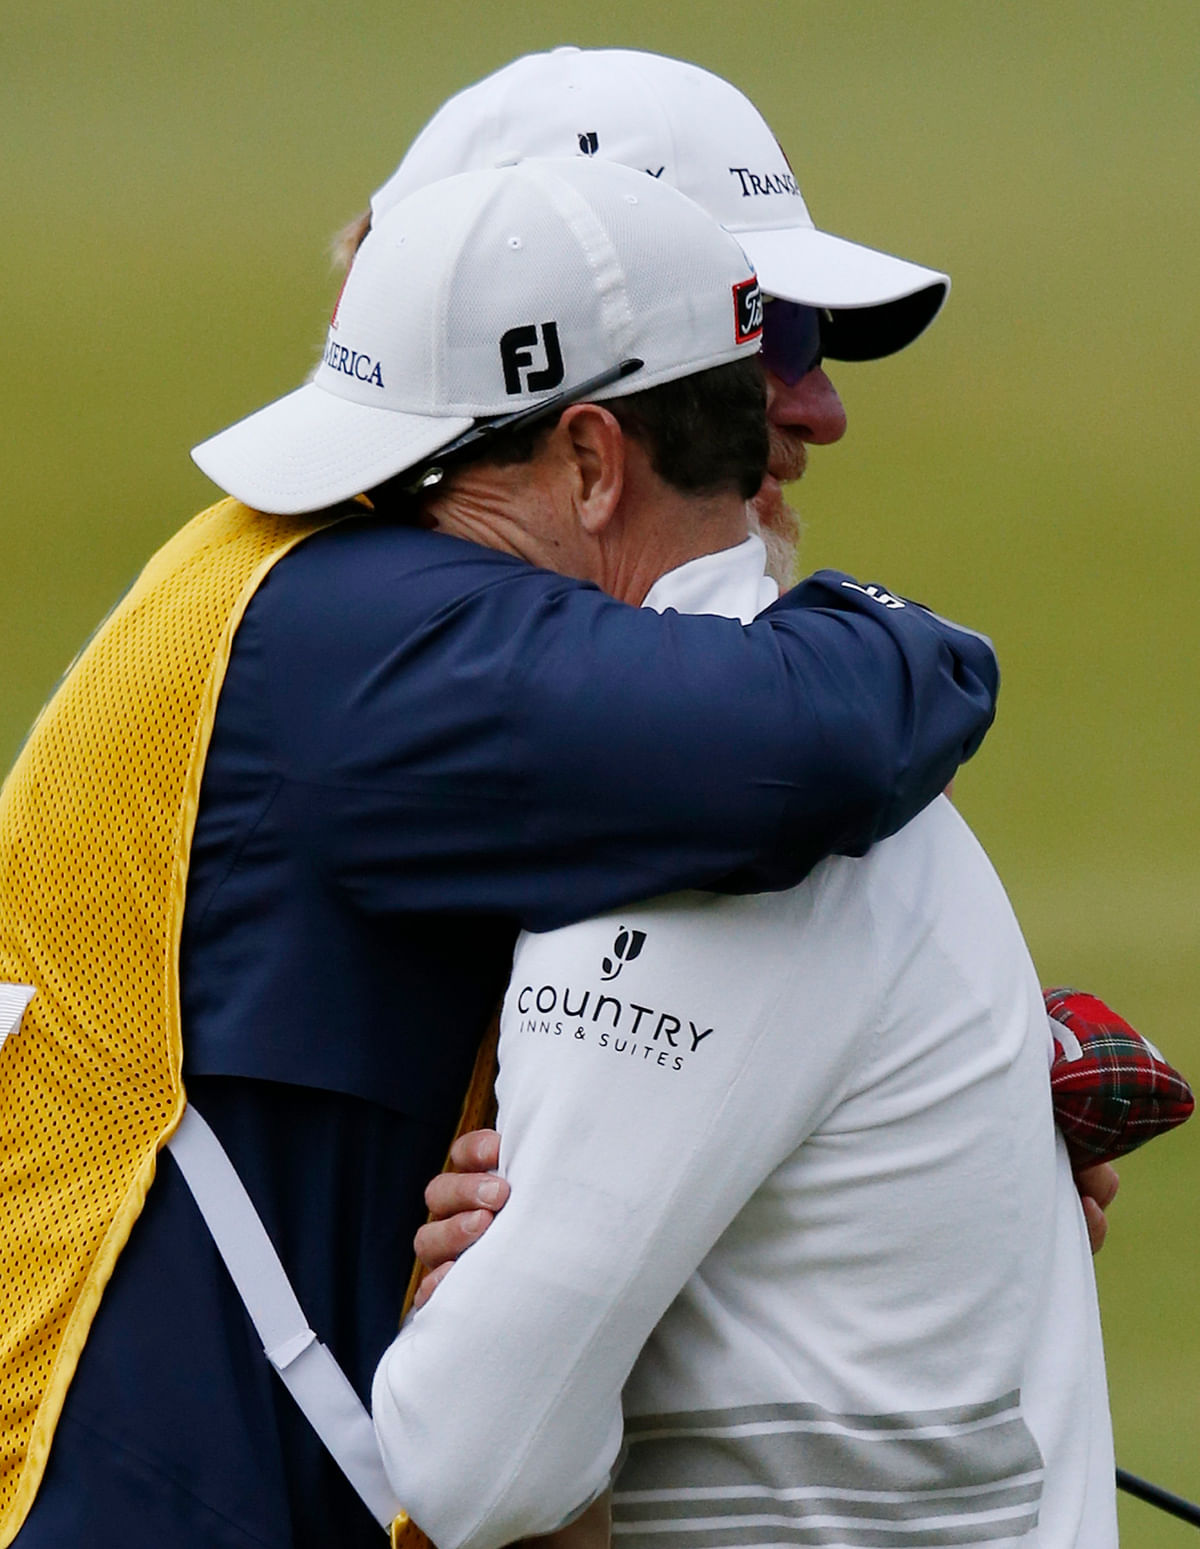 Johnson beat Australian Marc Leishman and Louis Oosthuizen of South Africa in the play-off.